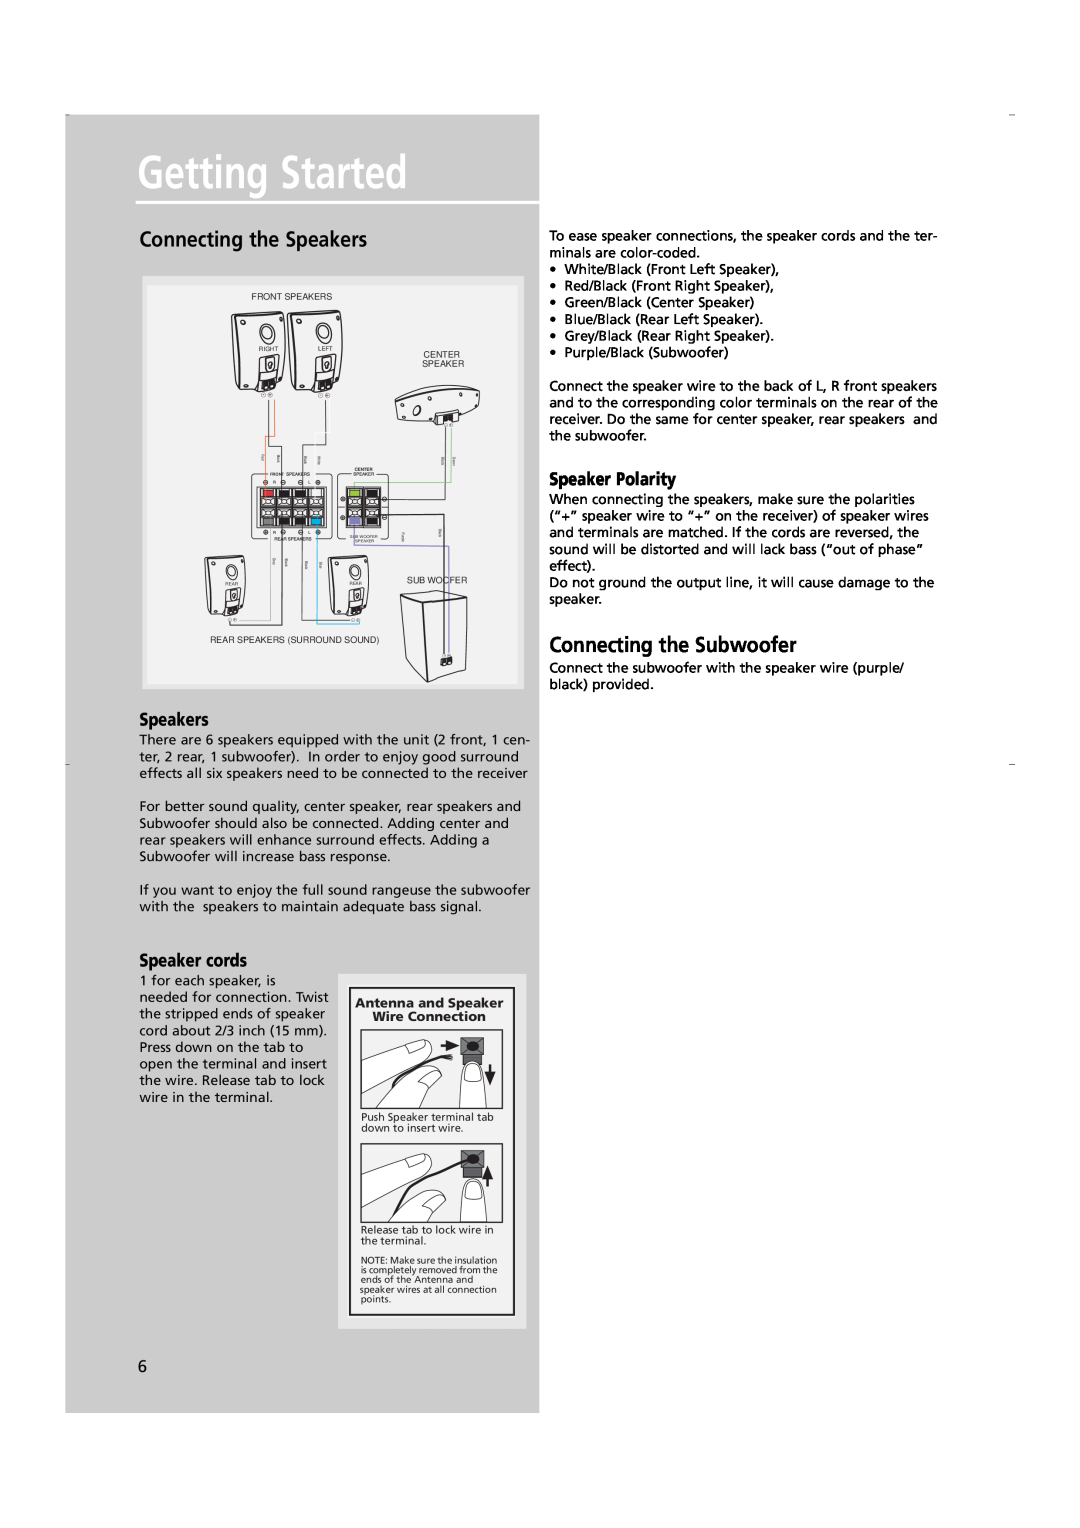 RCA RTD250 user manual Getting Started, Speakers, Speaker Polarity, Speaker cords, Antenna and Speaker Wire Connection 